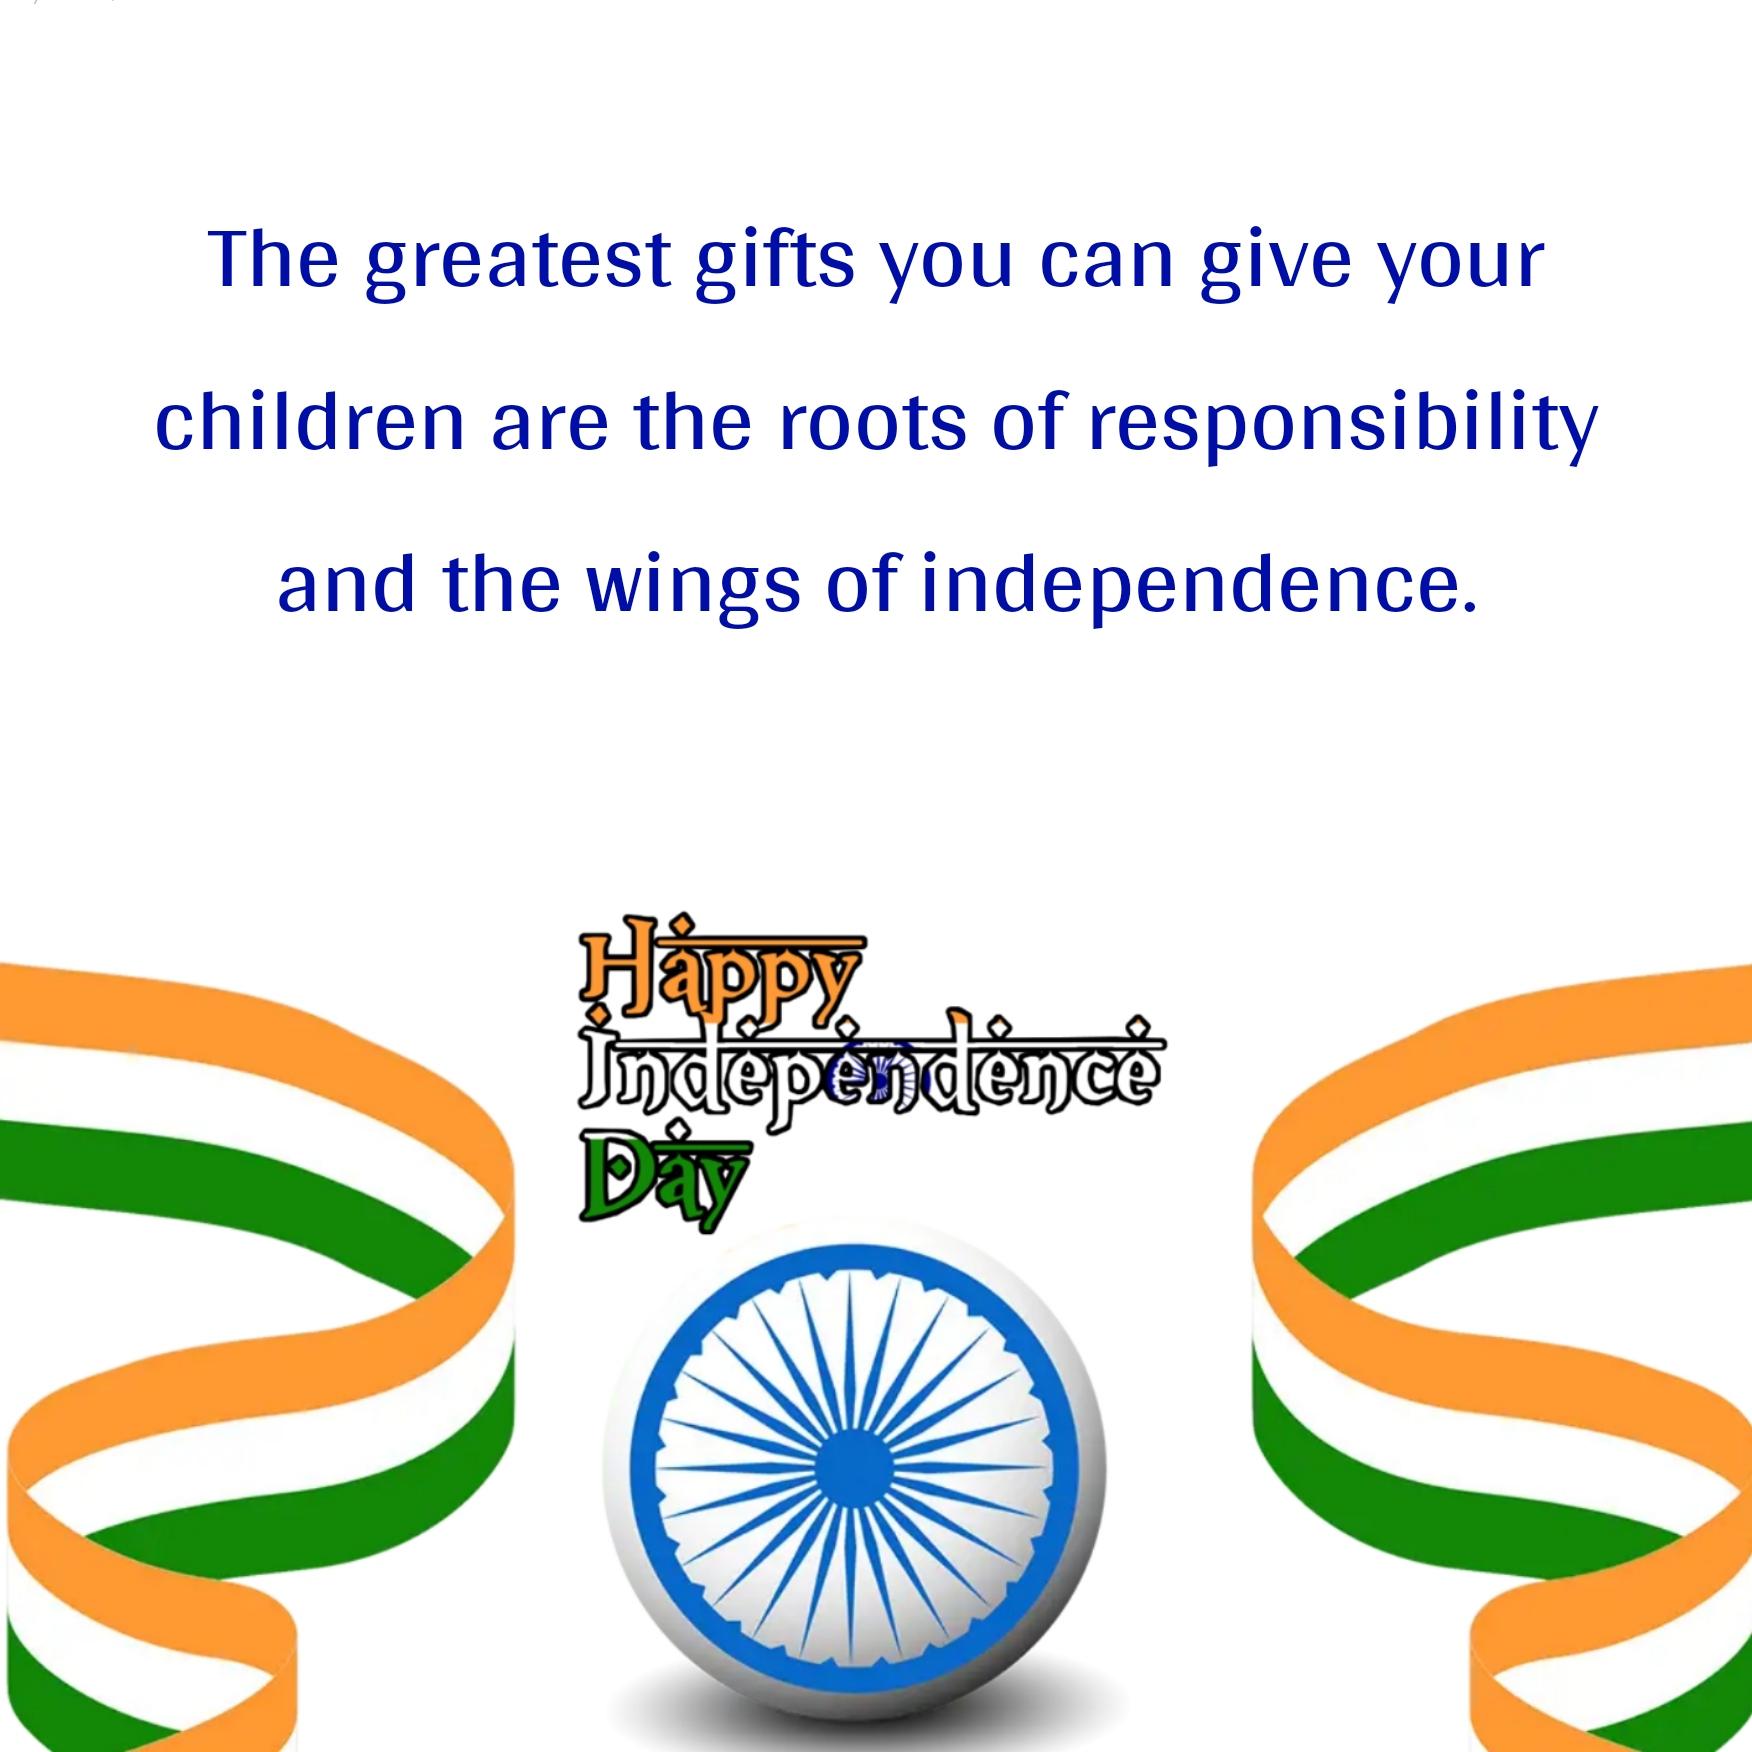 The greatest gifts you can give your children are the roots of responsibility